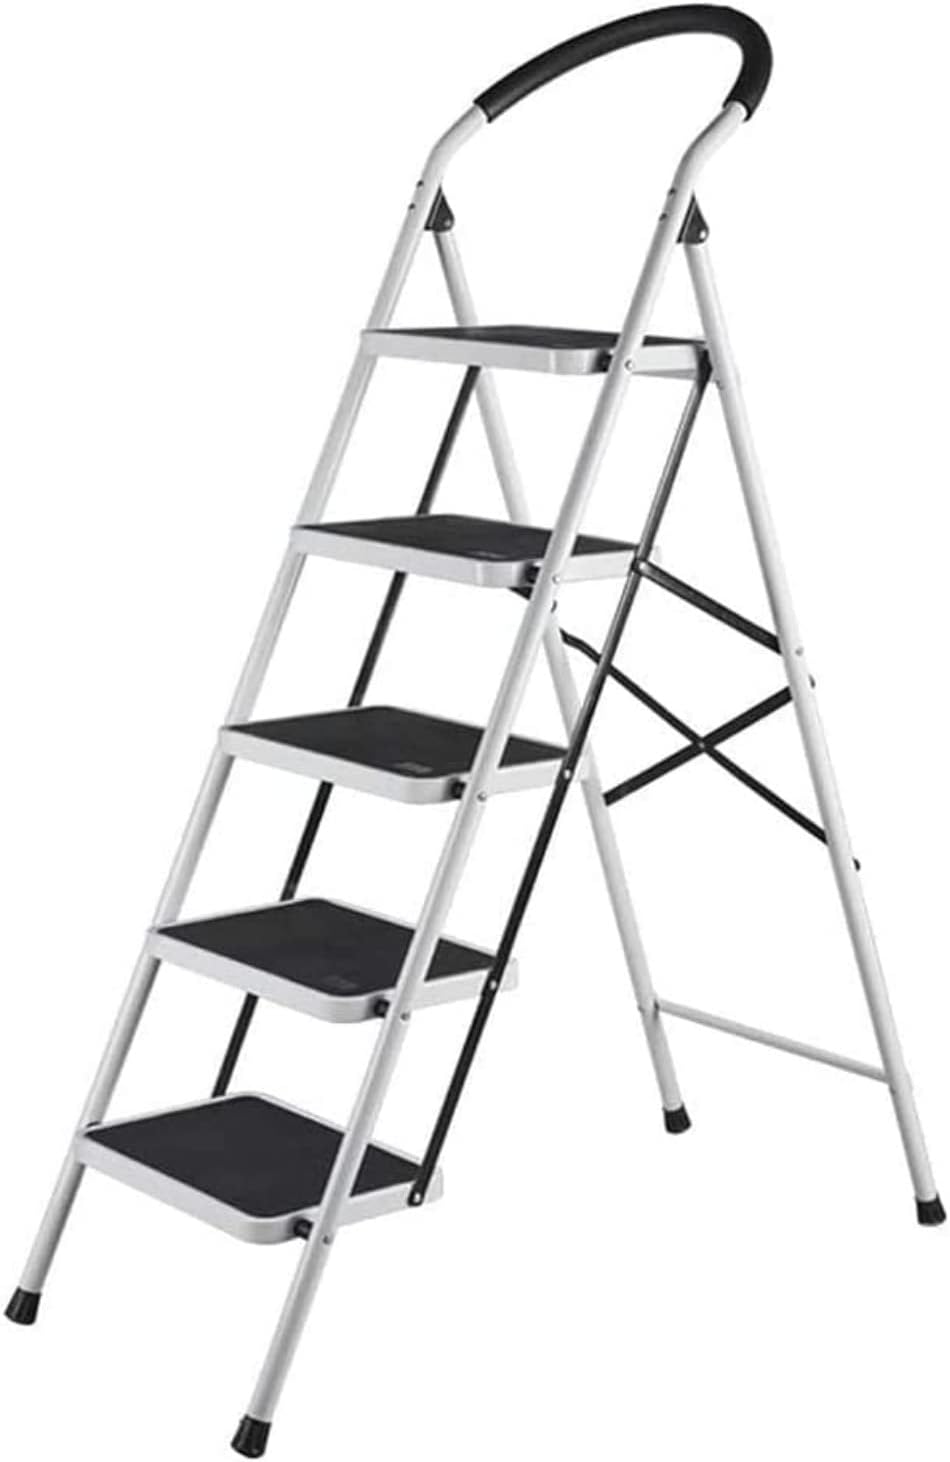 SKY-TOUCH Foldable Ladder, Home Ladder Folding Step Stool with Wide Anti-Slip Pedal, Adults Folding Sturdy Steel Ladder for Home,Kitchen, Garden, Office